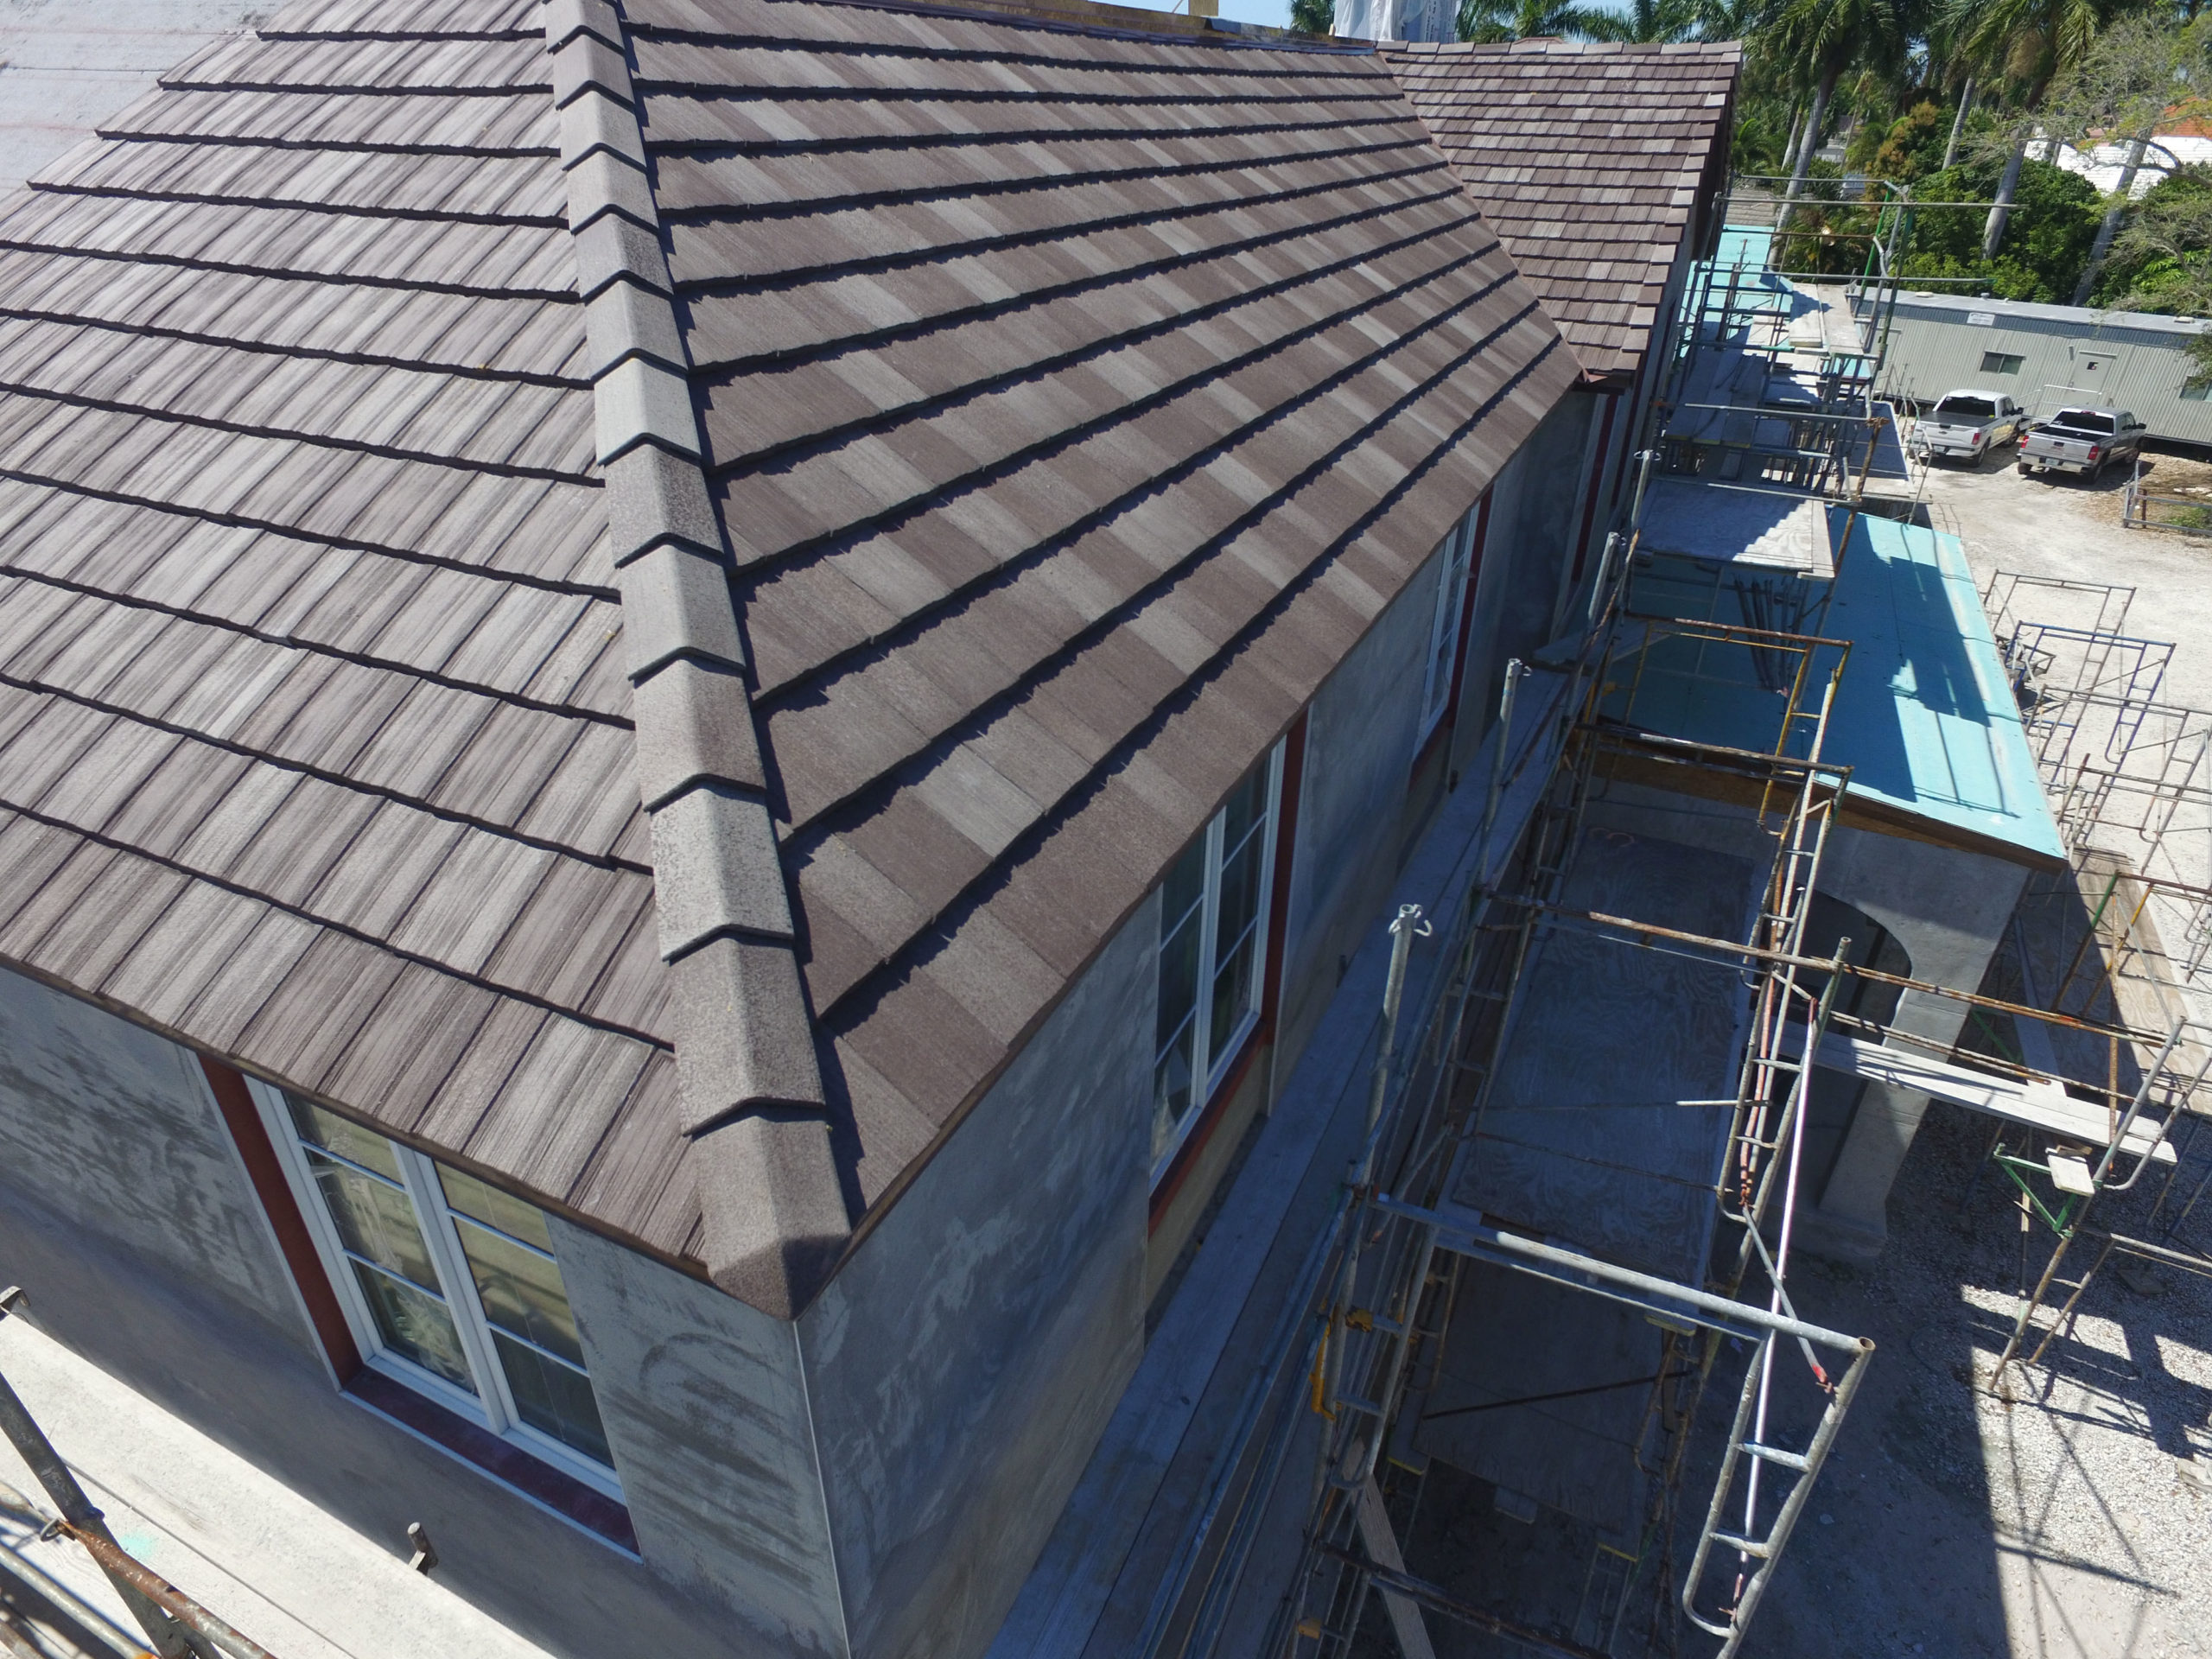 Private Residence in Naples, FL with Century Shake in Western Cedar by Ludowici Roof Tile